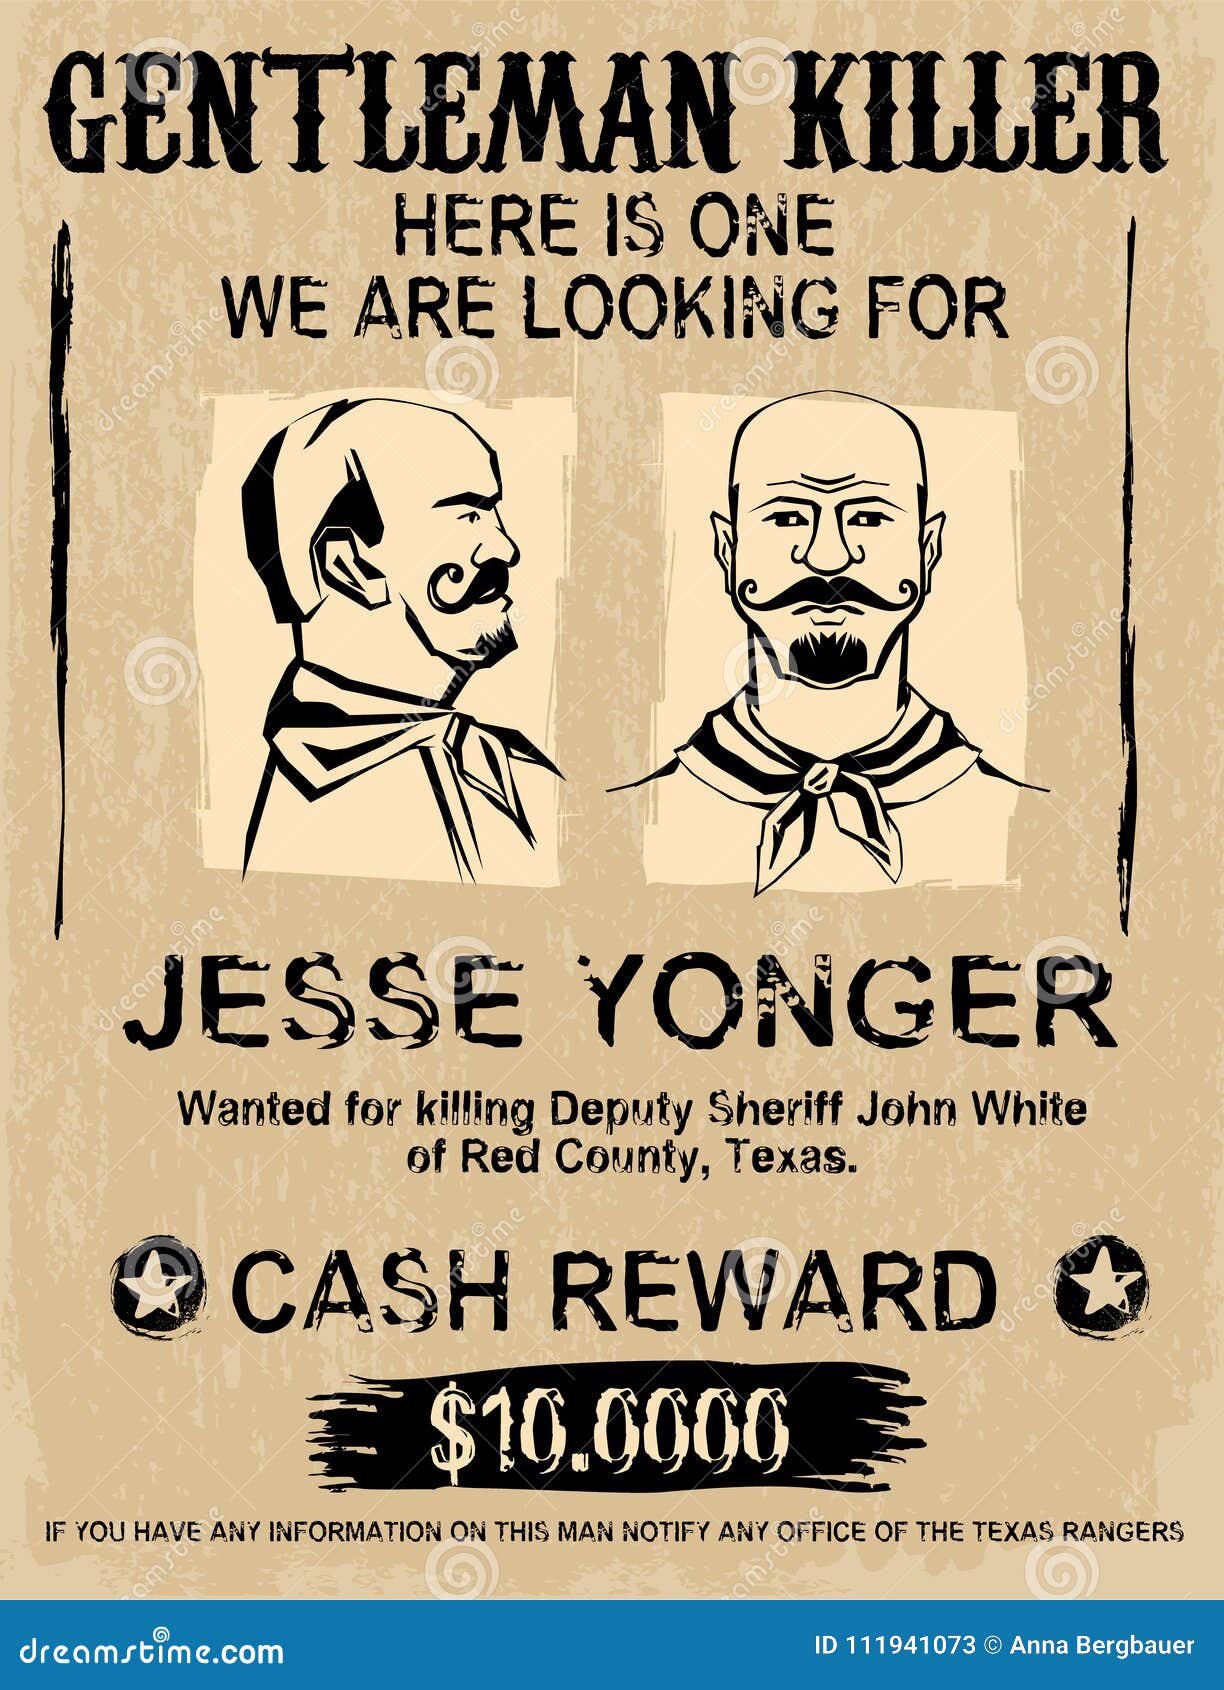 Vintage wanted poster. Vintage poster with hand drawn grunge lettering. Gentleman kiiler wanted. Stamp words made from unique letters. Beautiful vector illustration. Editable graphic element in beige and black colors.